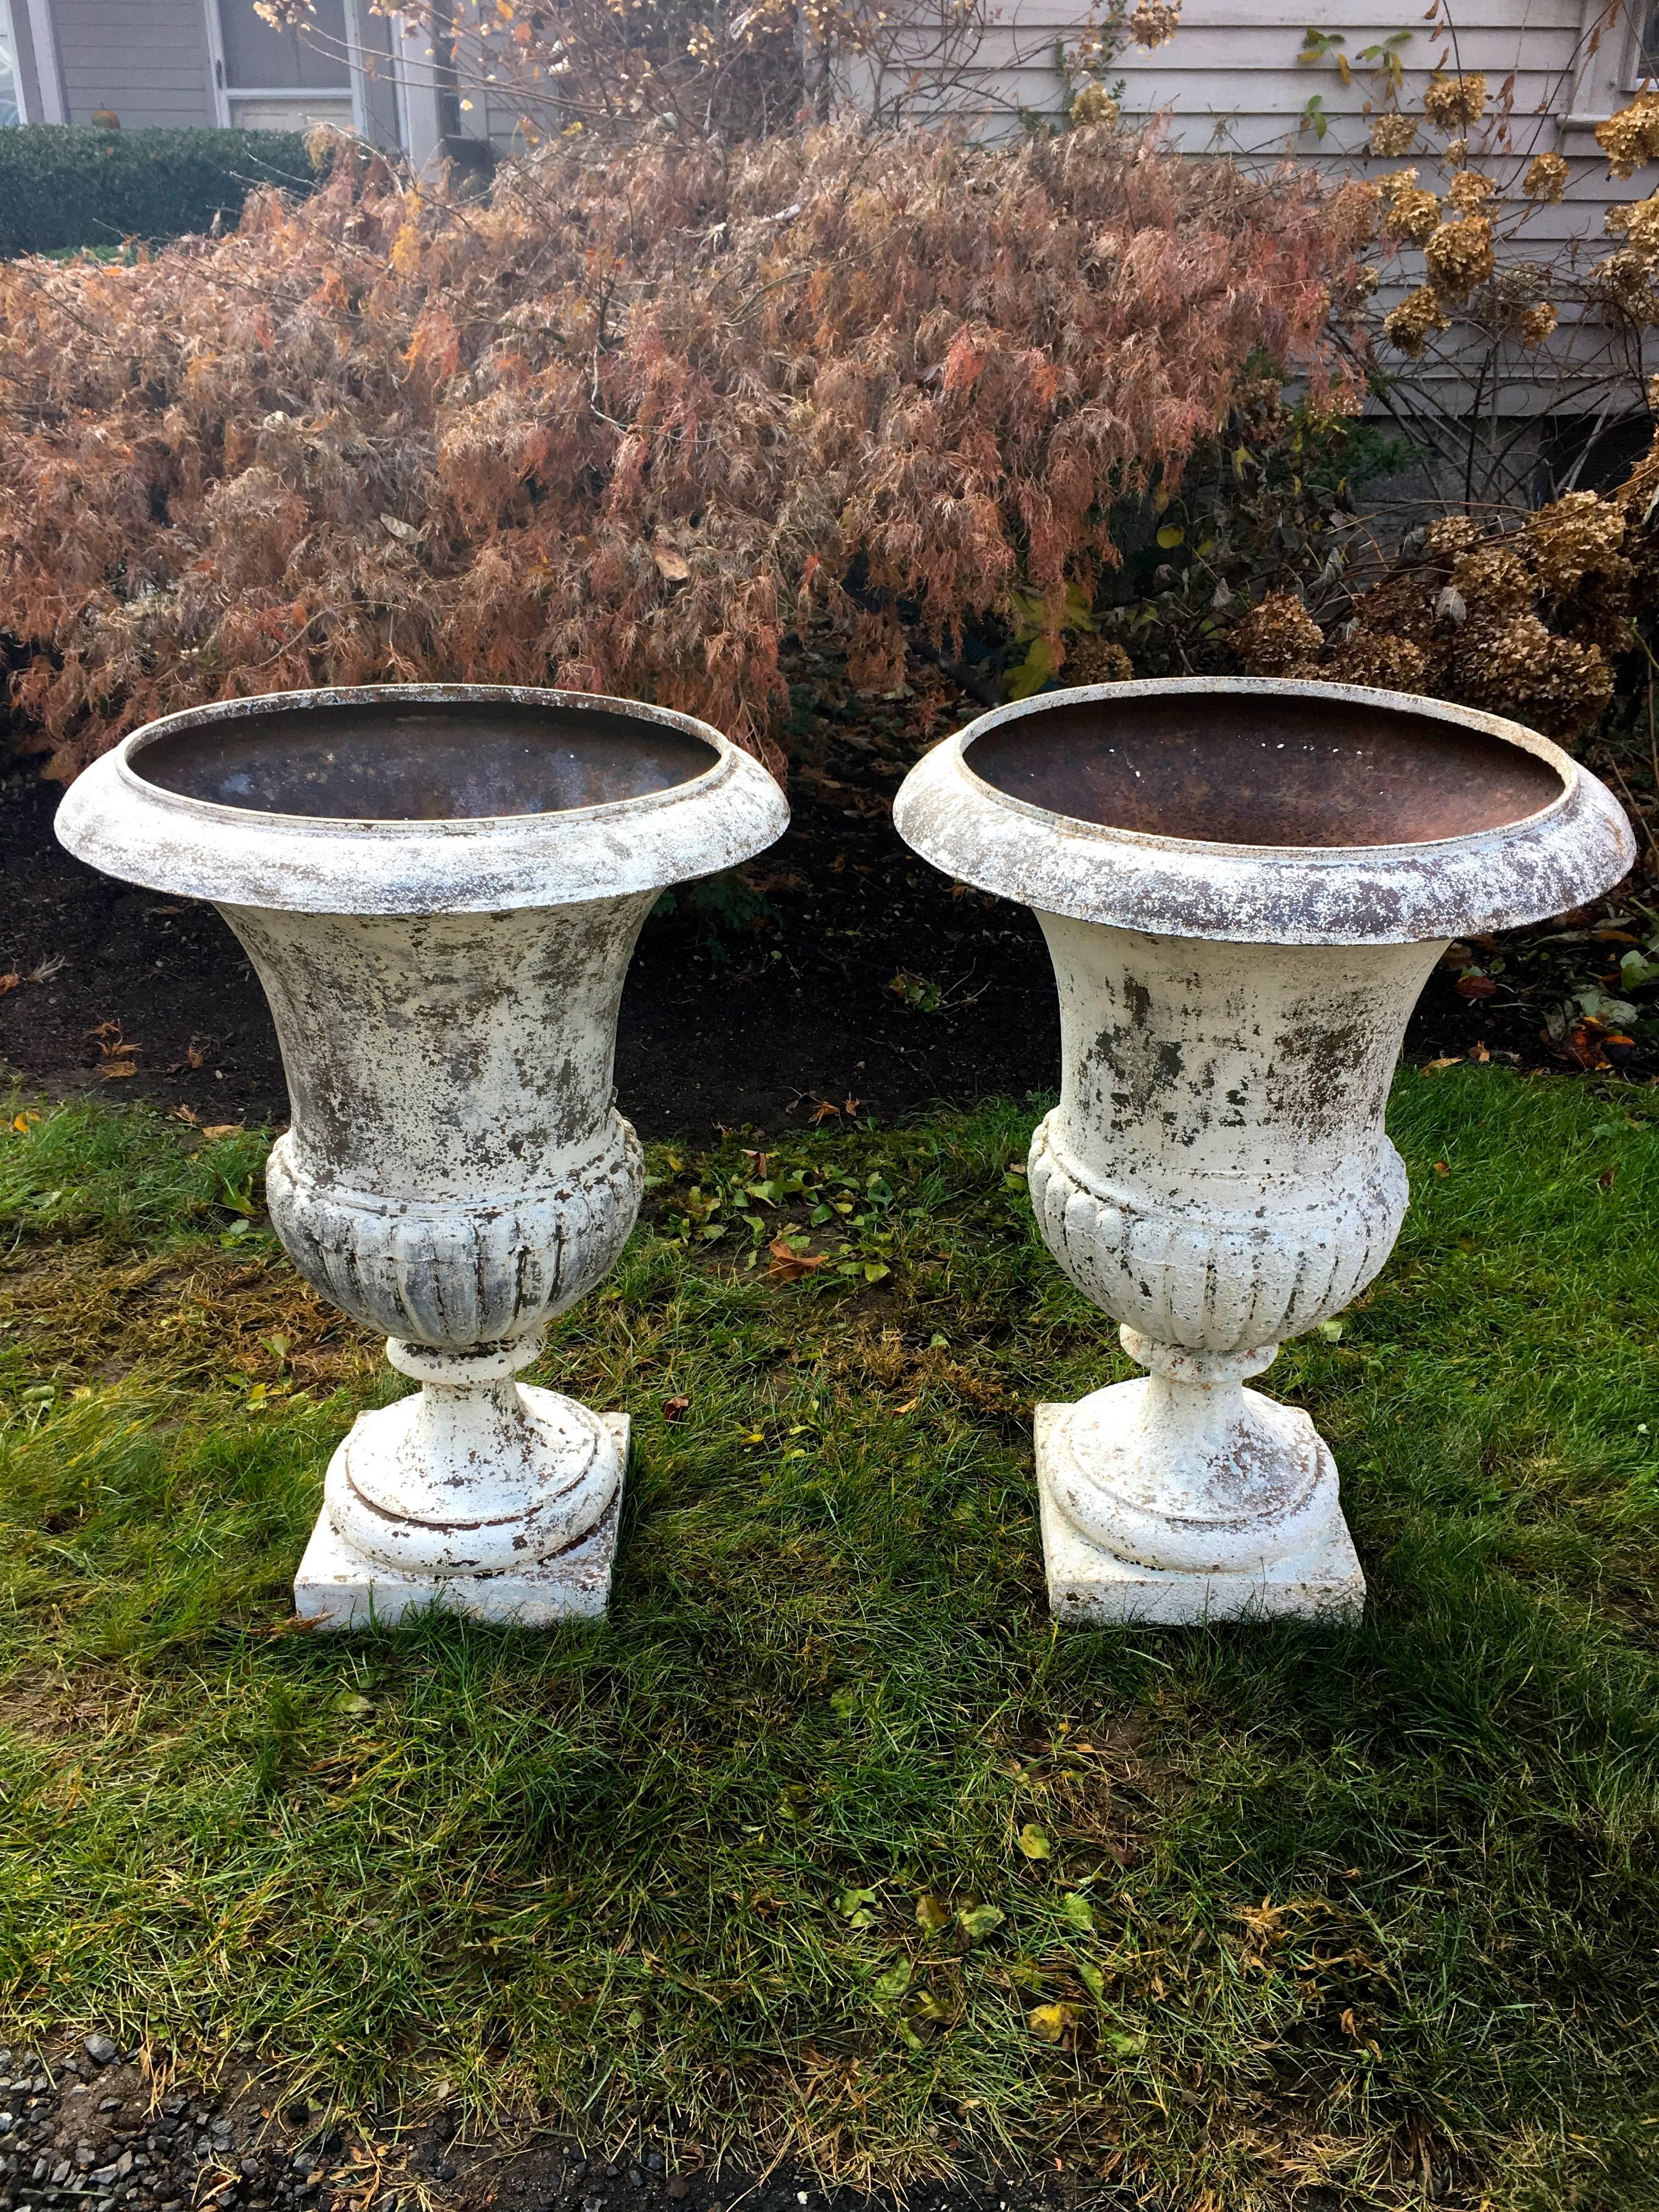 Truly magnificent, these classical cast iron Medici urns are French and date to around 1840. In perfect condition and in old weathered white painted surface, their scale will amaze. Very rare to find such an enormous pair in this condition. The